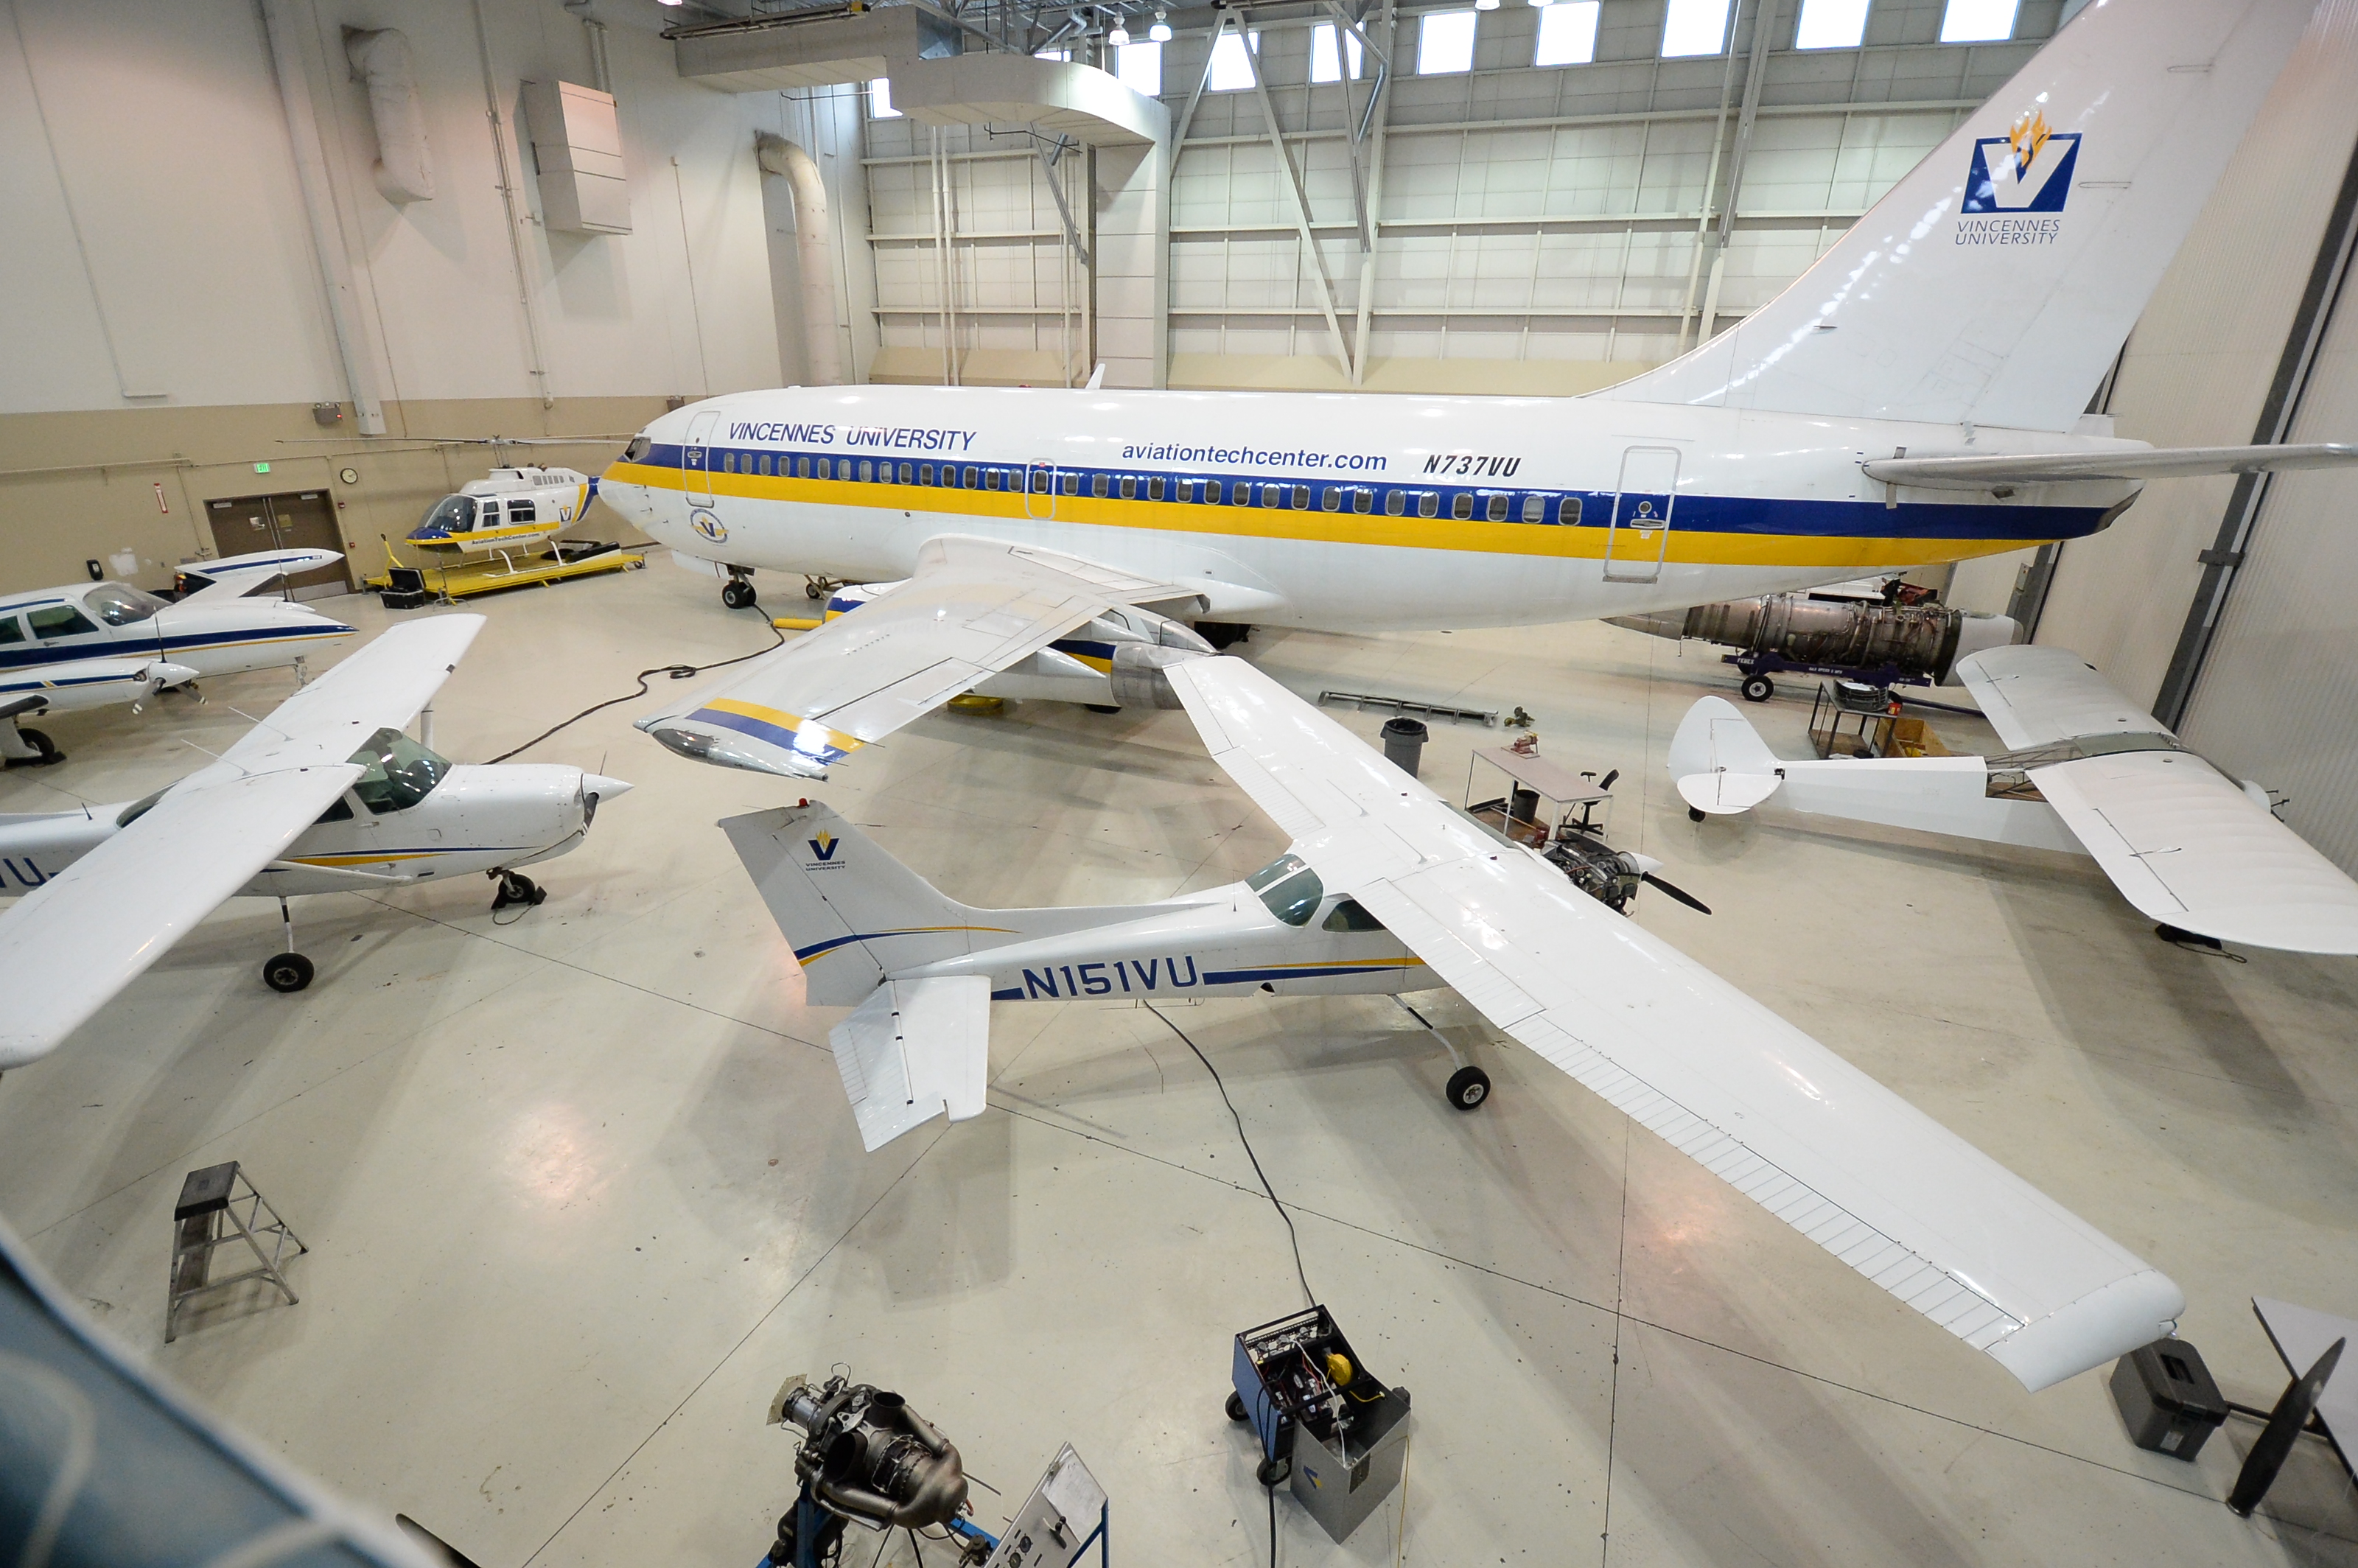 Multiple VU aircraft including a 737, helicopter and more in a hangar at the VU Aviation Technology Center in Indianapolis.